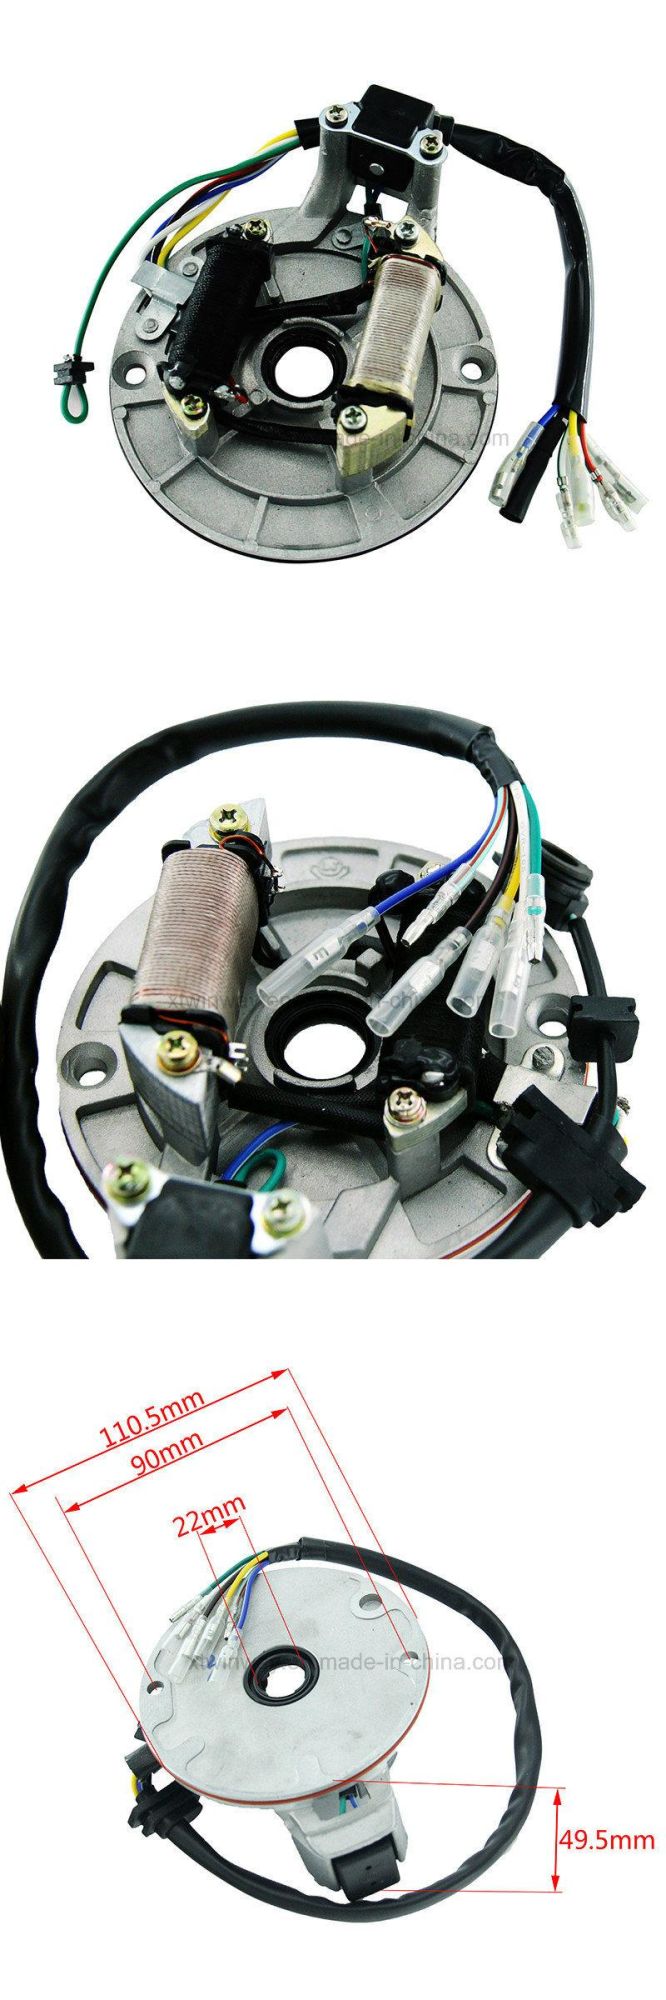 Ww-8139 High Quality Motorcycle Generator Magnet Motor Stator Coil Fit for Jh-70